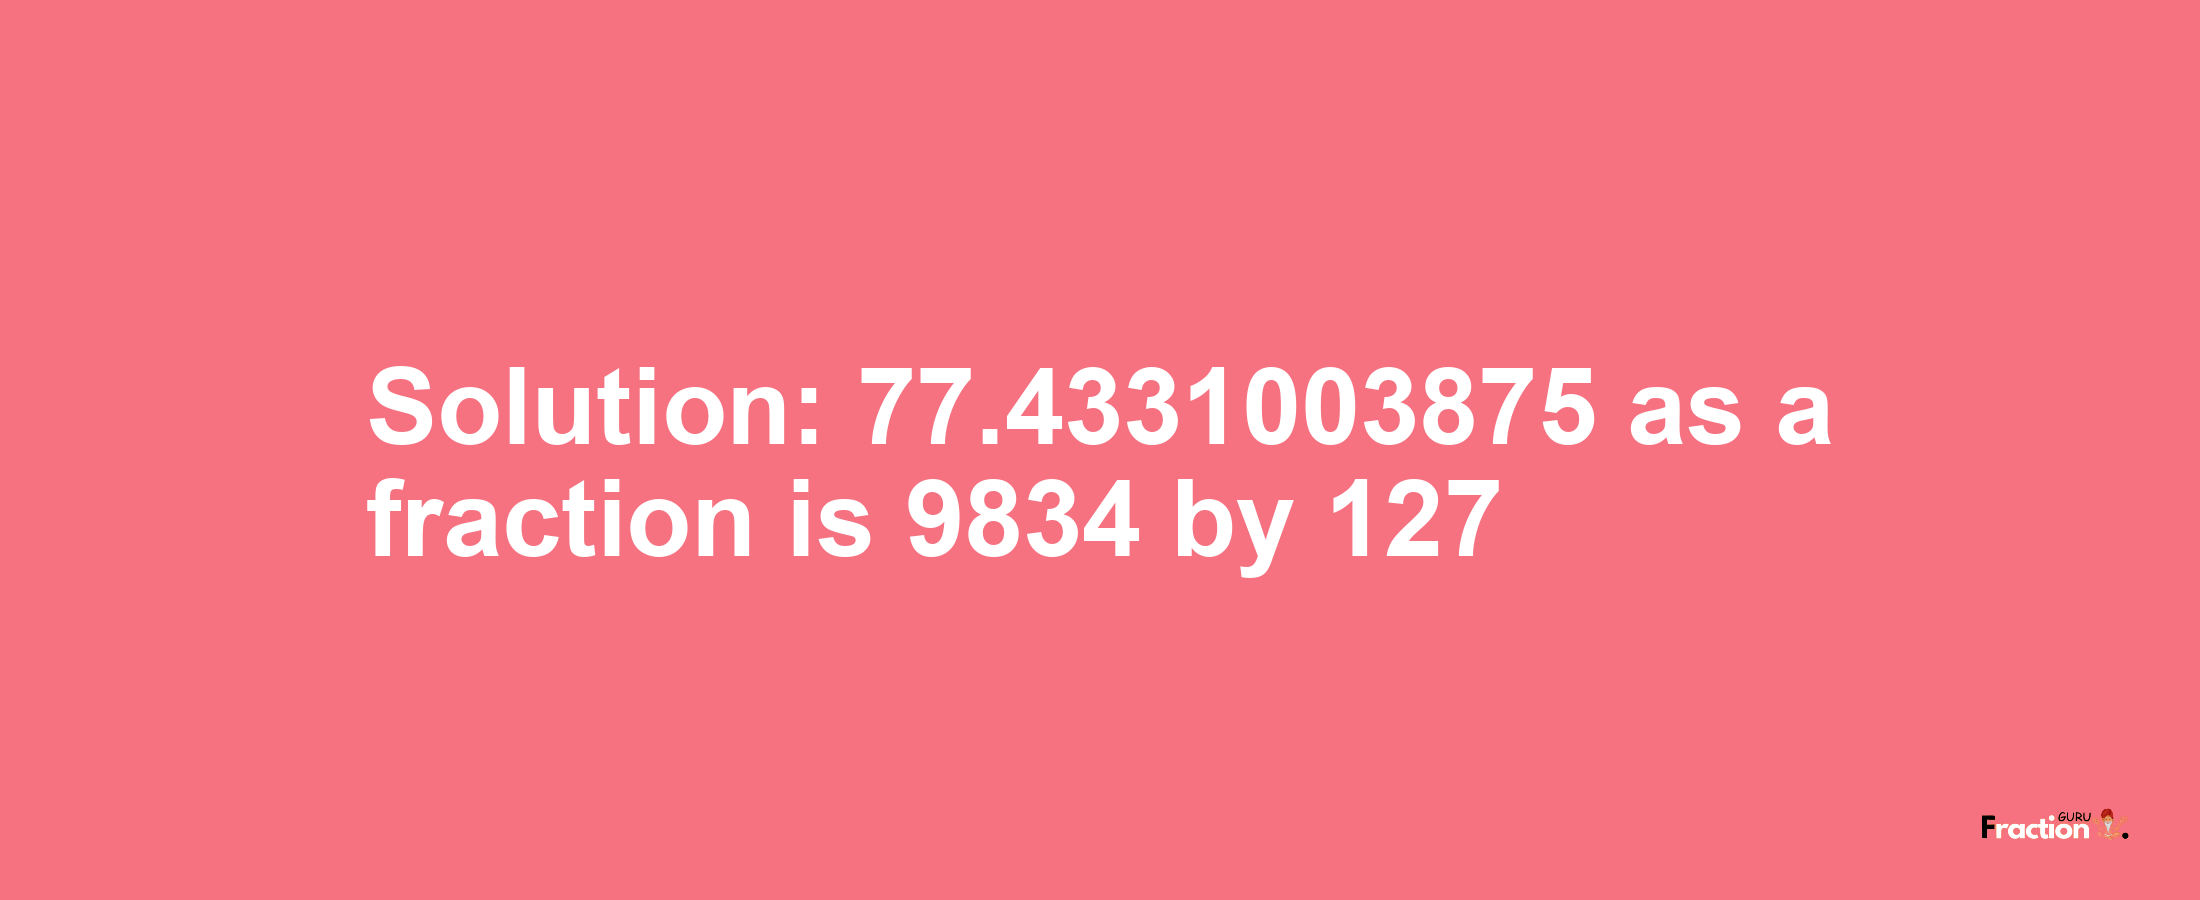 Solution:77.4331003875 as a fraction is 9834/127